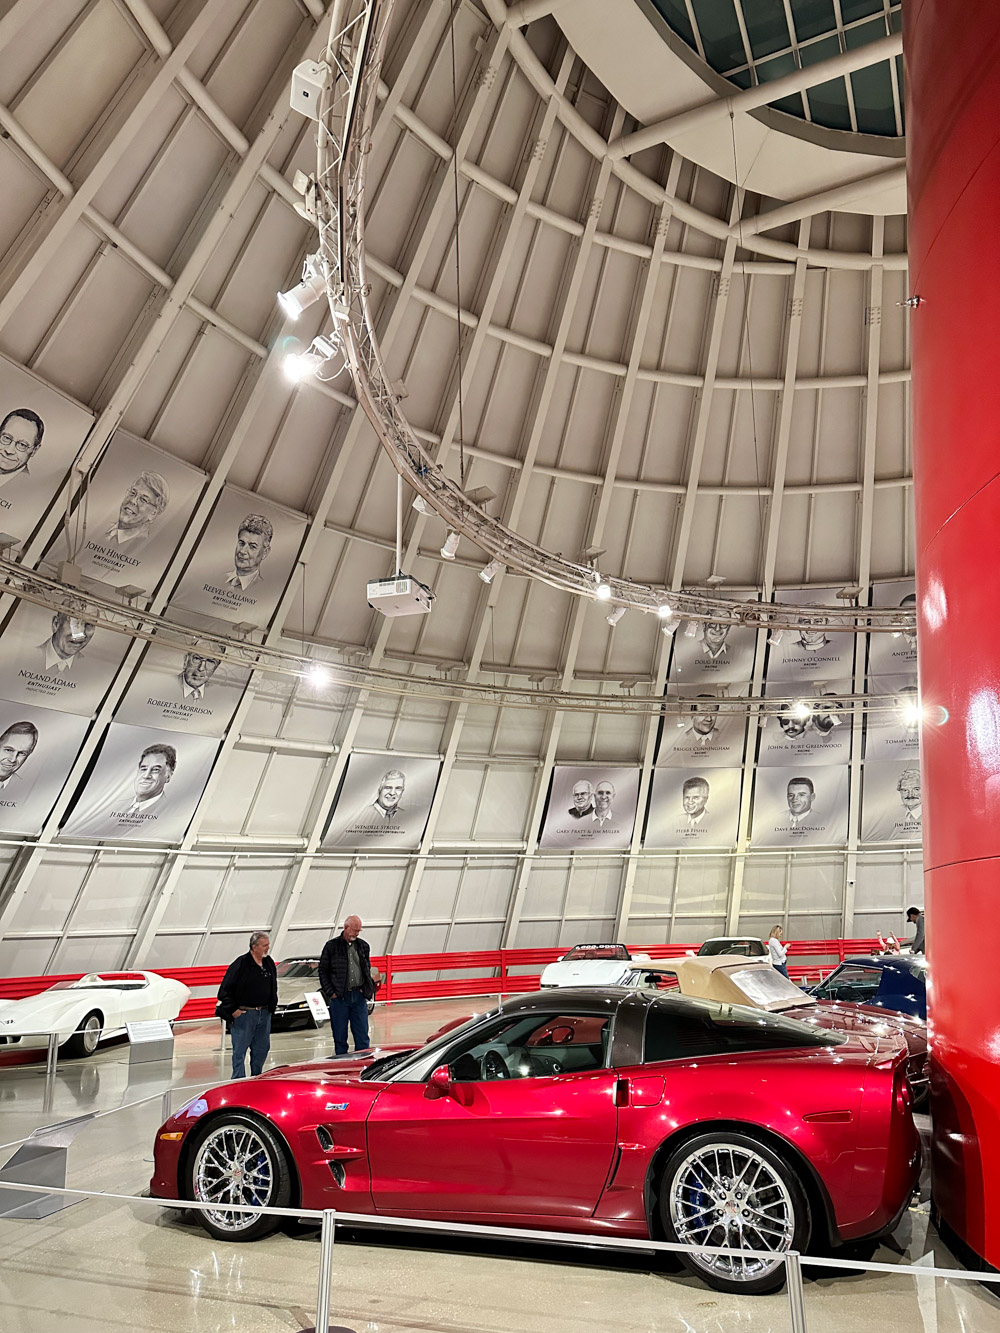 How to Plan a Trip to Bowling Green: Visit the National Corvette Museum